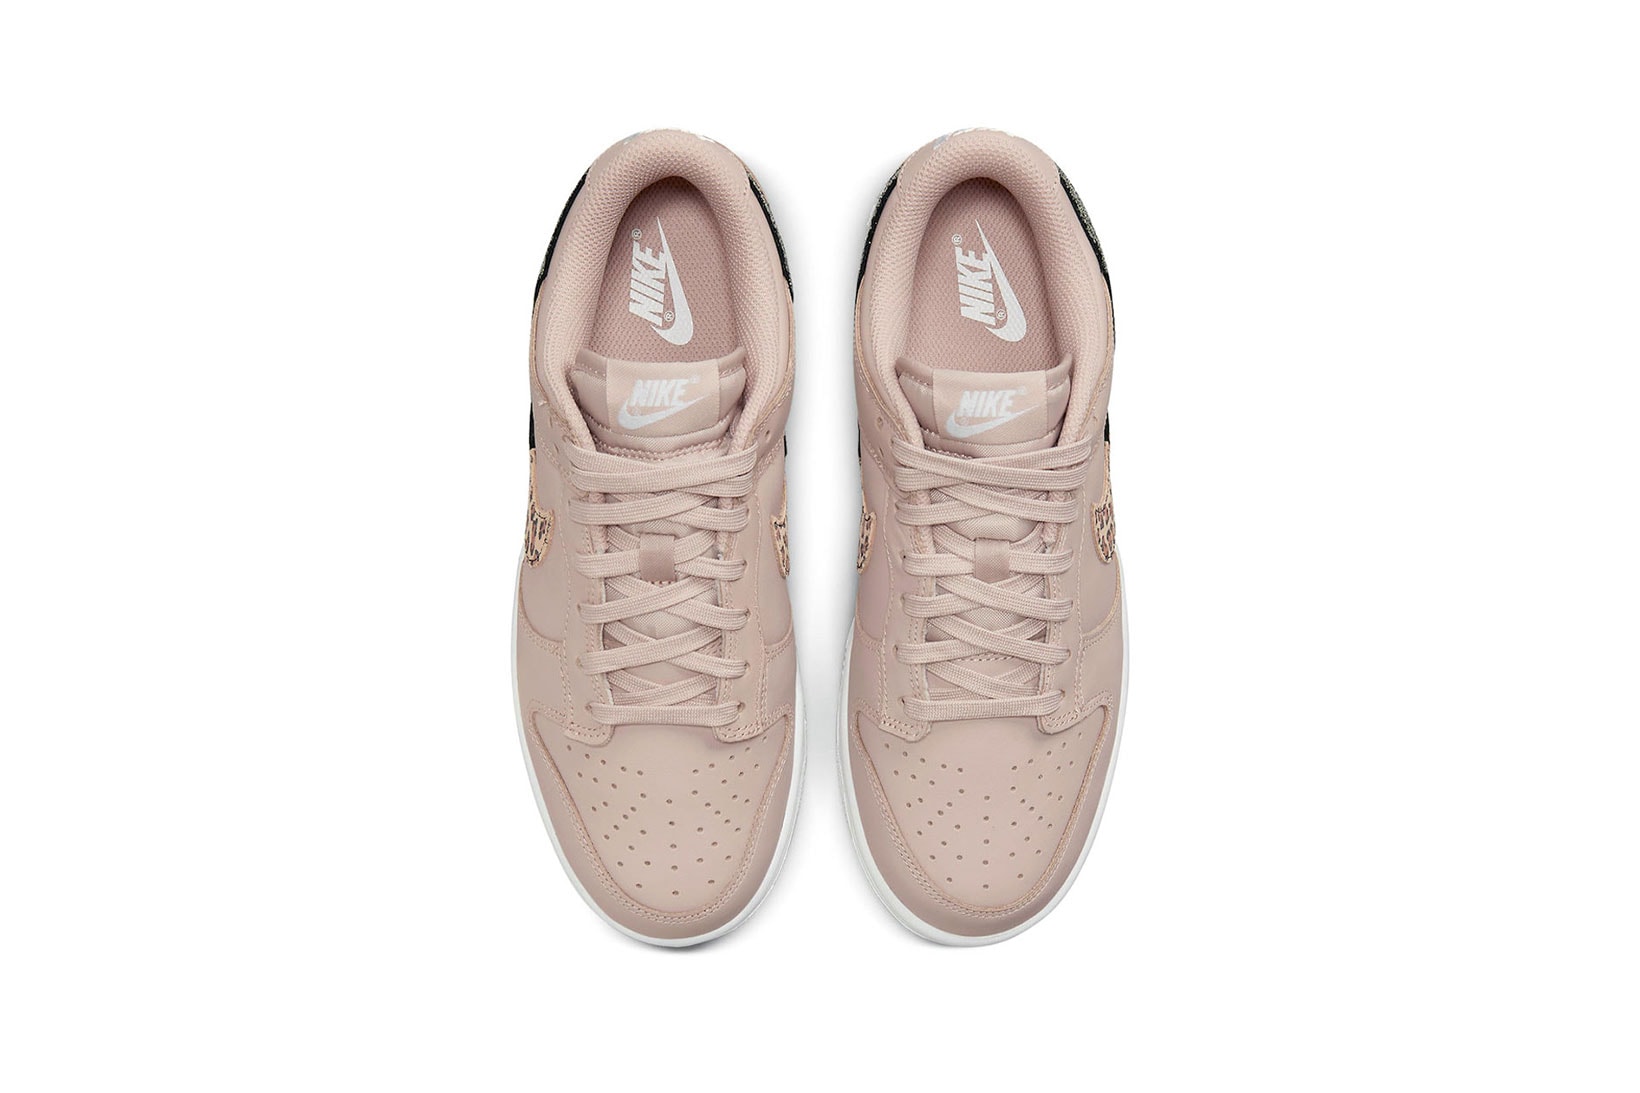 Nike Dunk Low "Animal Print" dusty pink top view